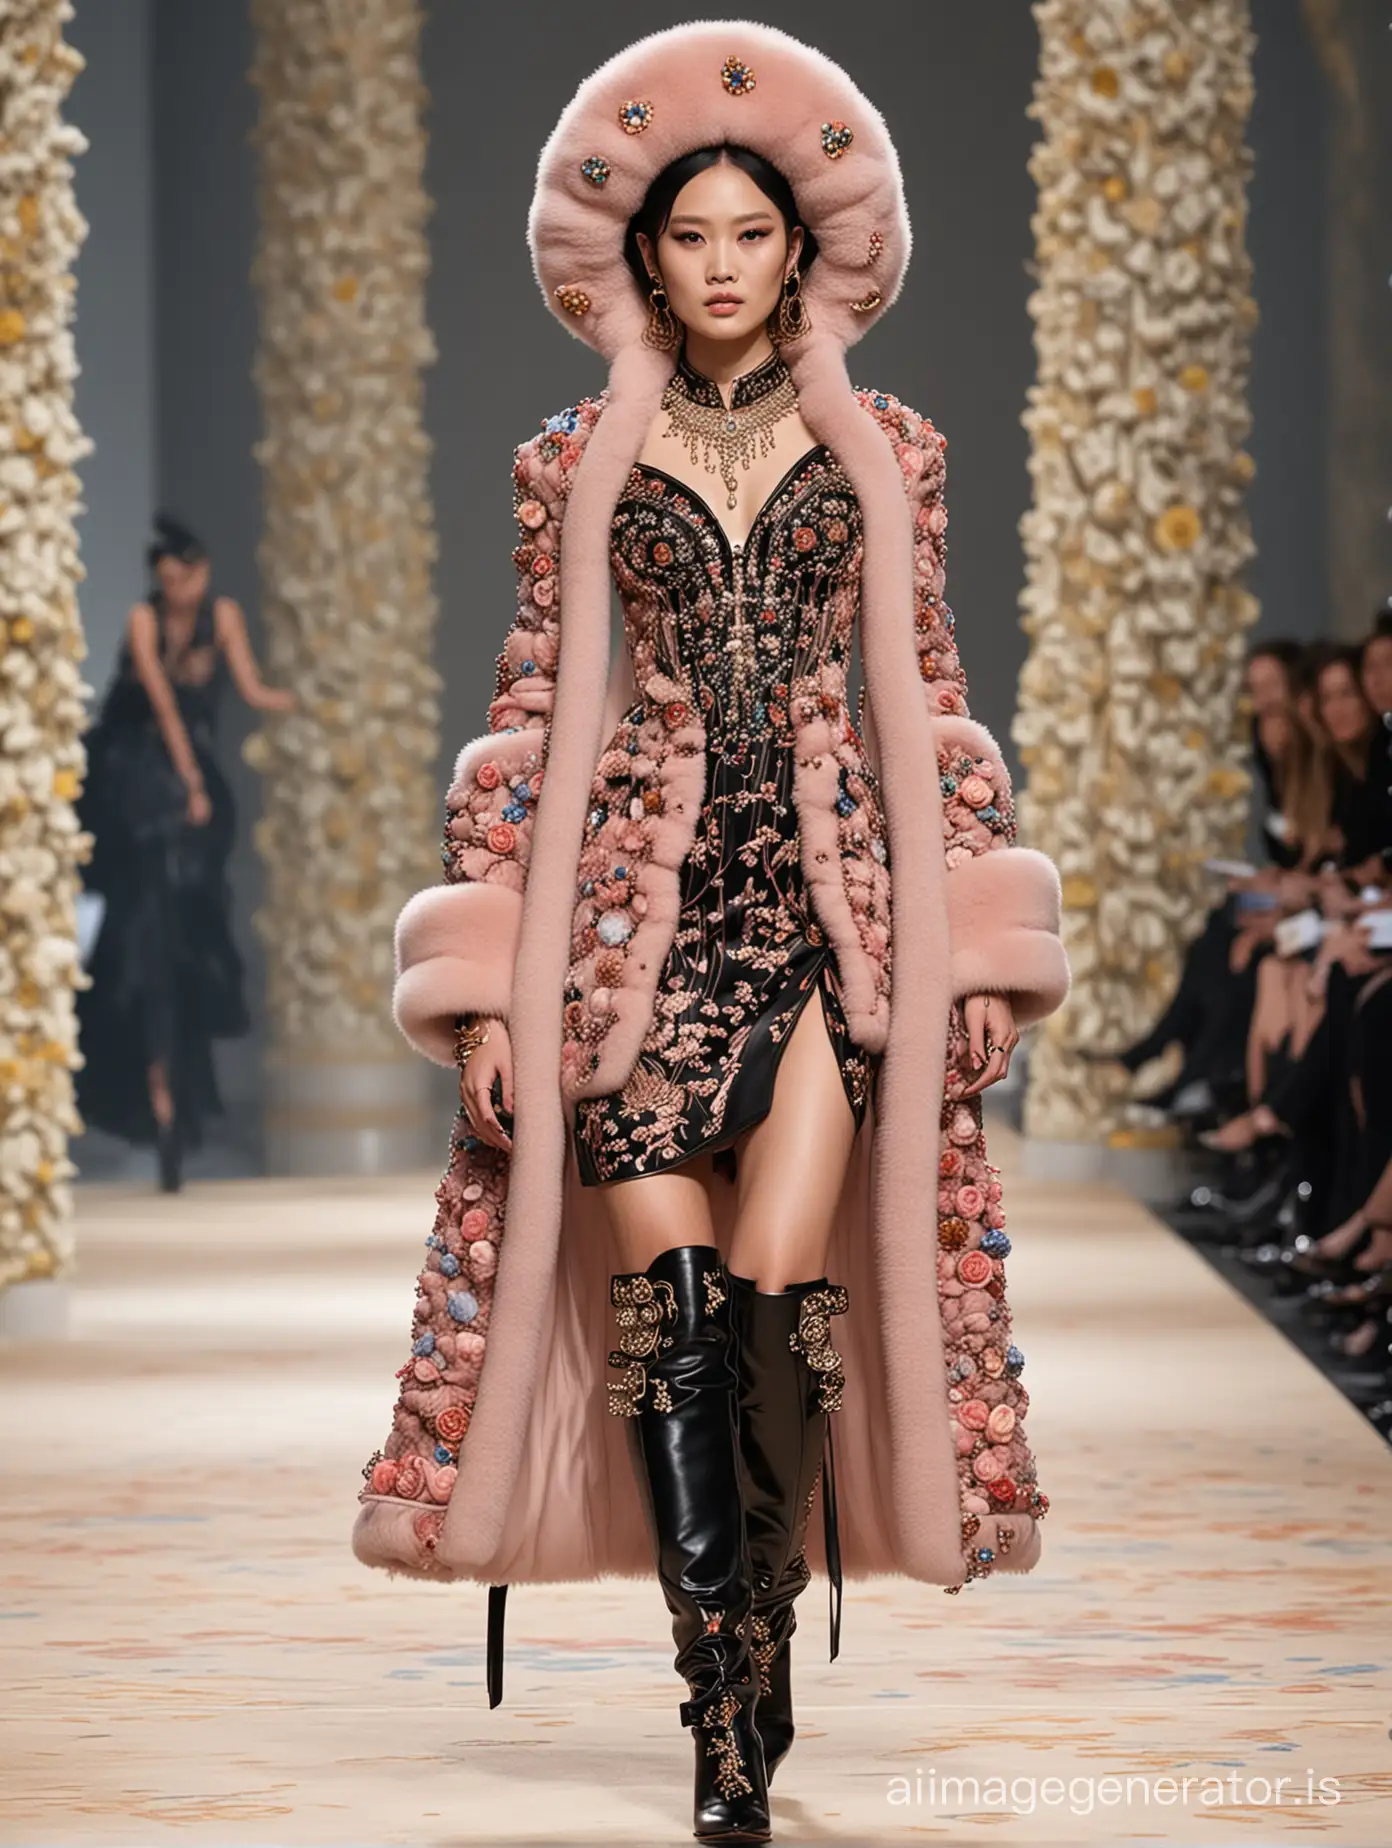 Elegant-Chinese-Model-Struts-in-Floral-Christian-Dior-Couture-Ensemble-and-Stiletto-Boots